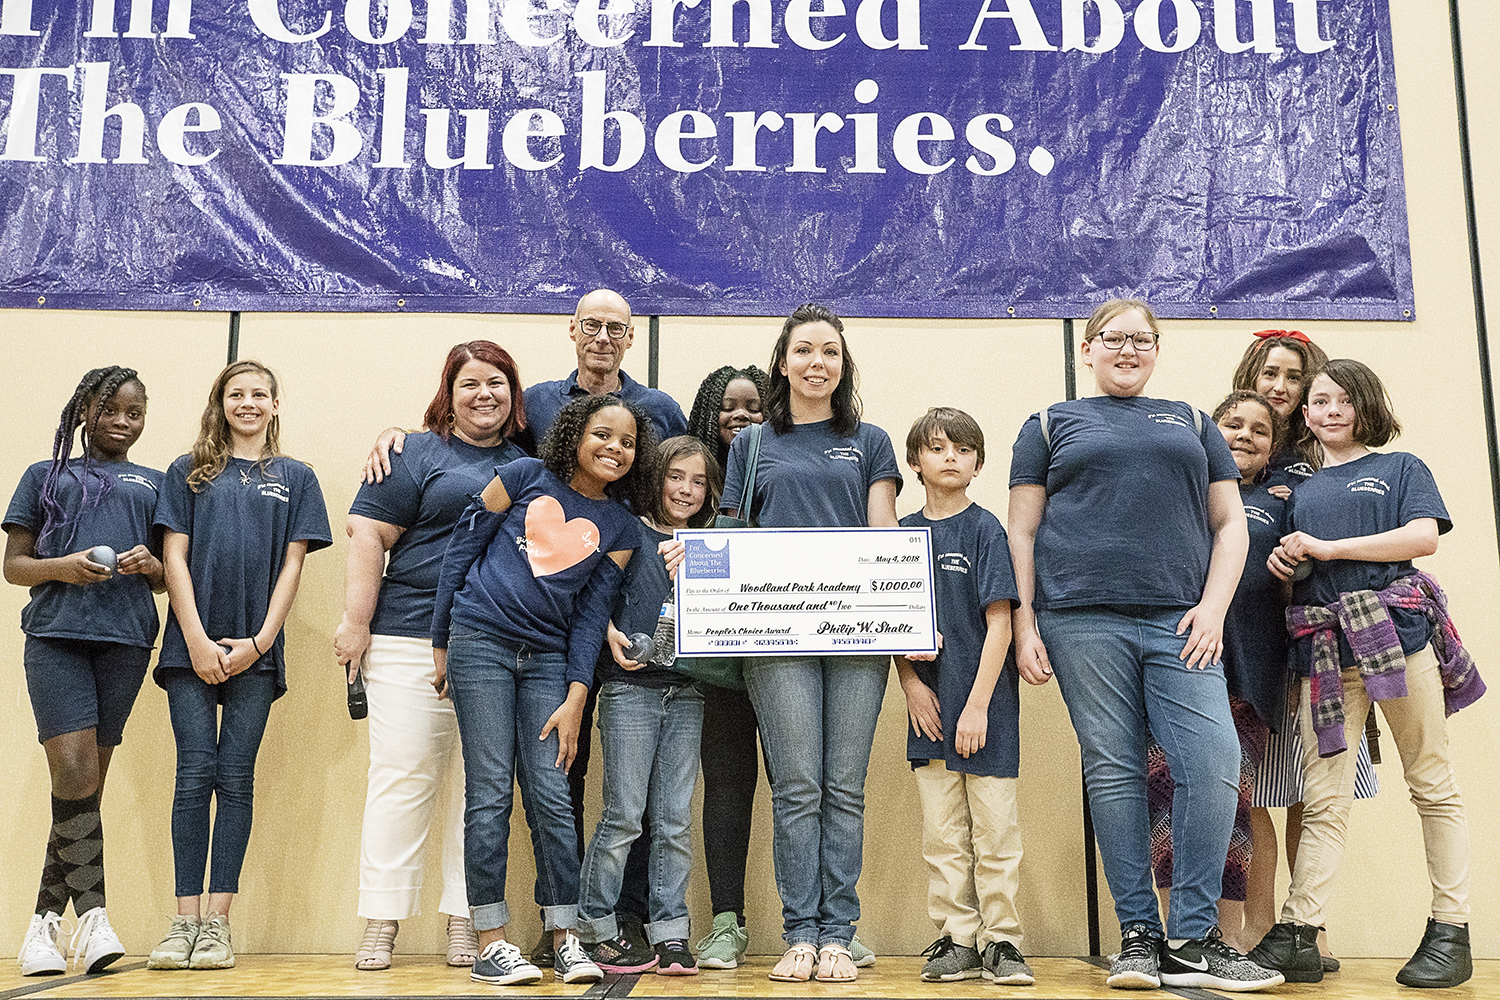 Flint, MI - Friday, May 4, 2018: Garnering 13,873 votes out of 56,350, Woodland Park Academy takes home the People's Choice Award with a $1,000 donation from Blueberry Founder Phil Shaltz during the 5th Annual Blueberry Ambassador Awards Party at the